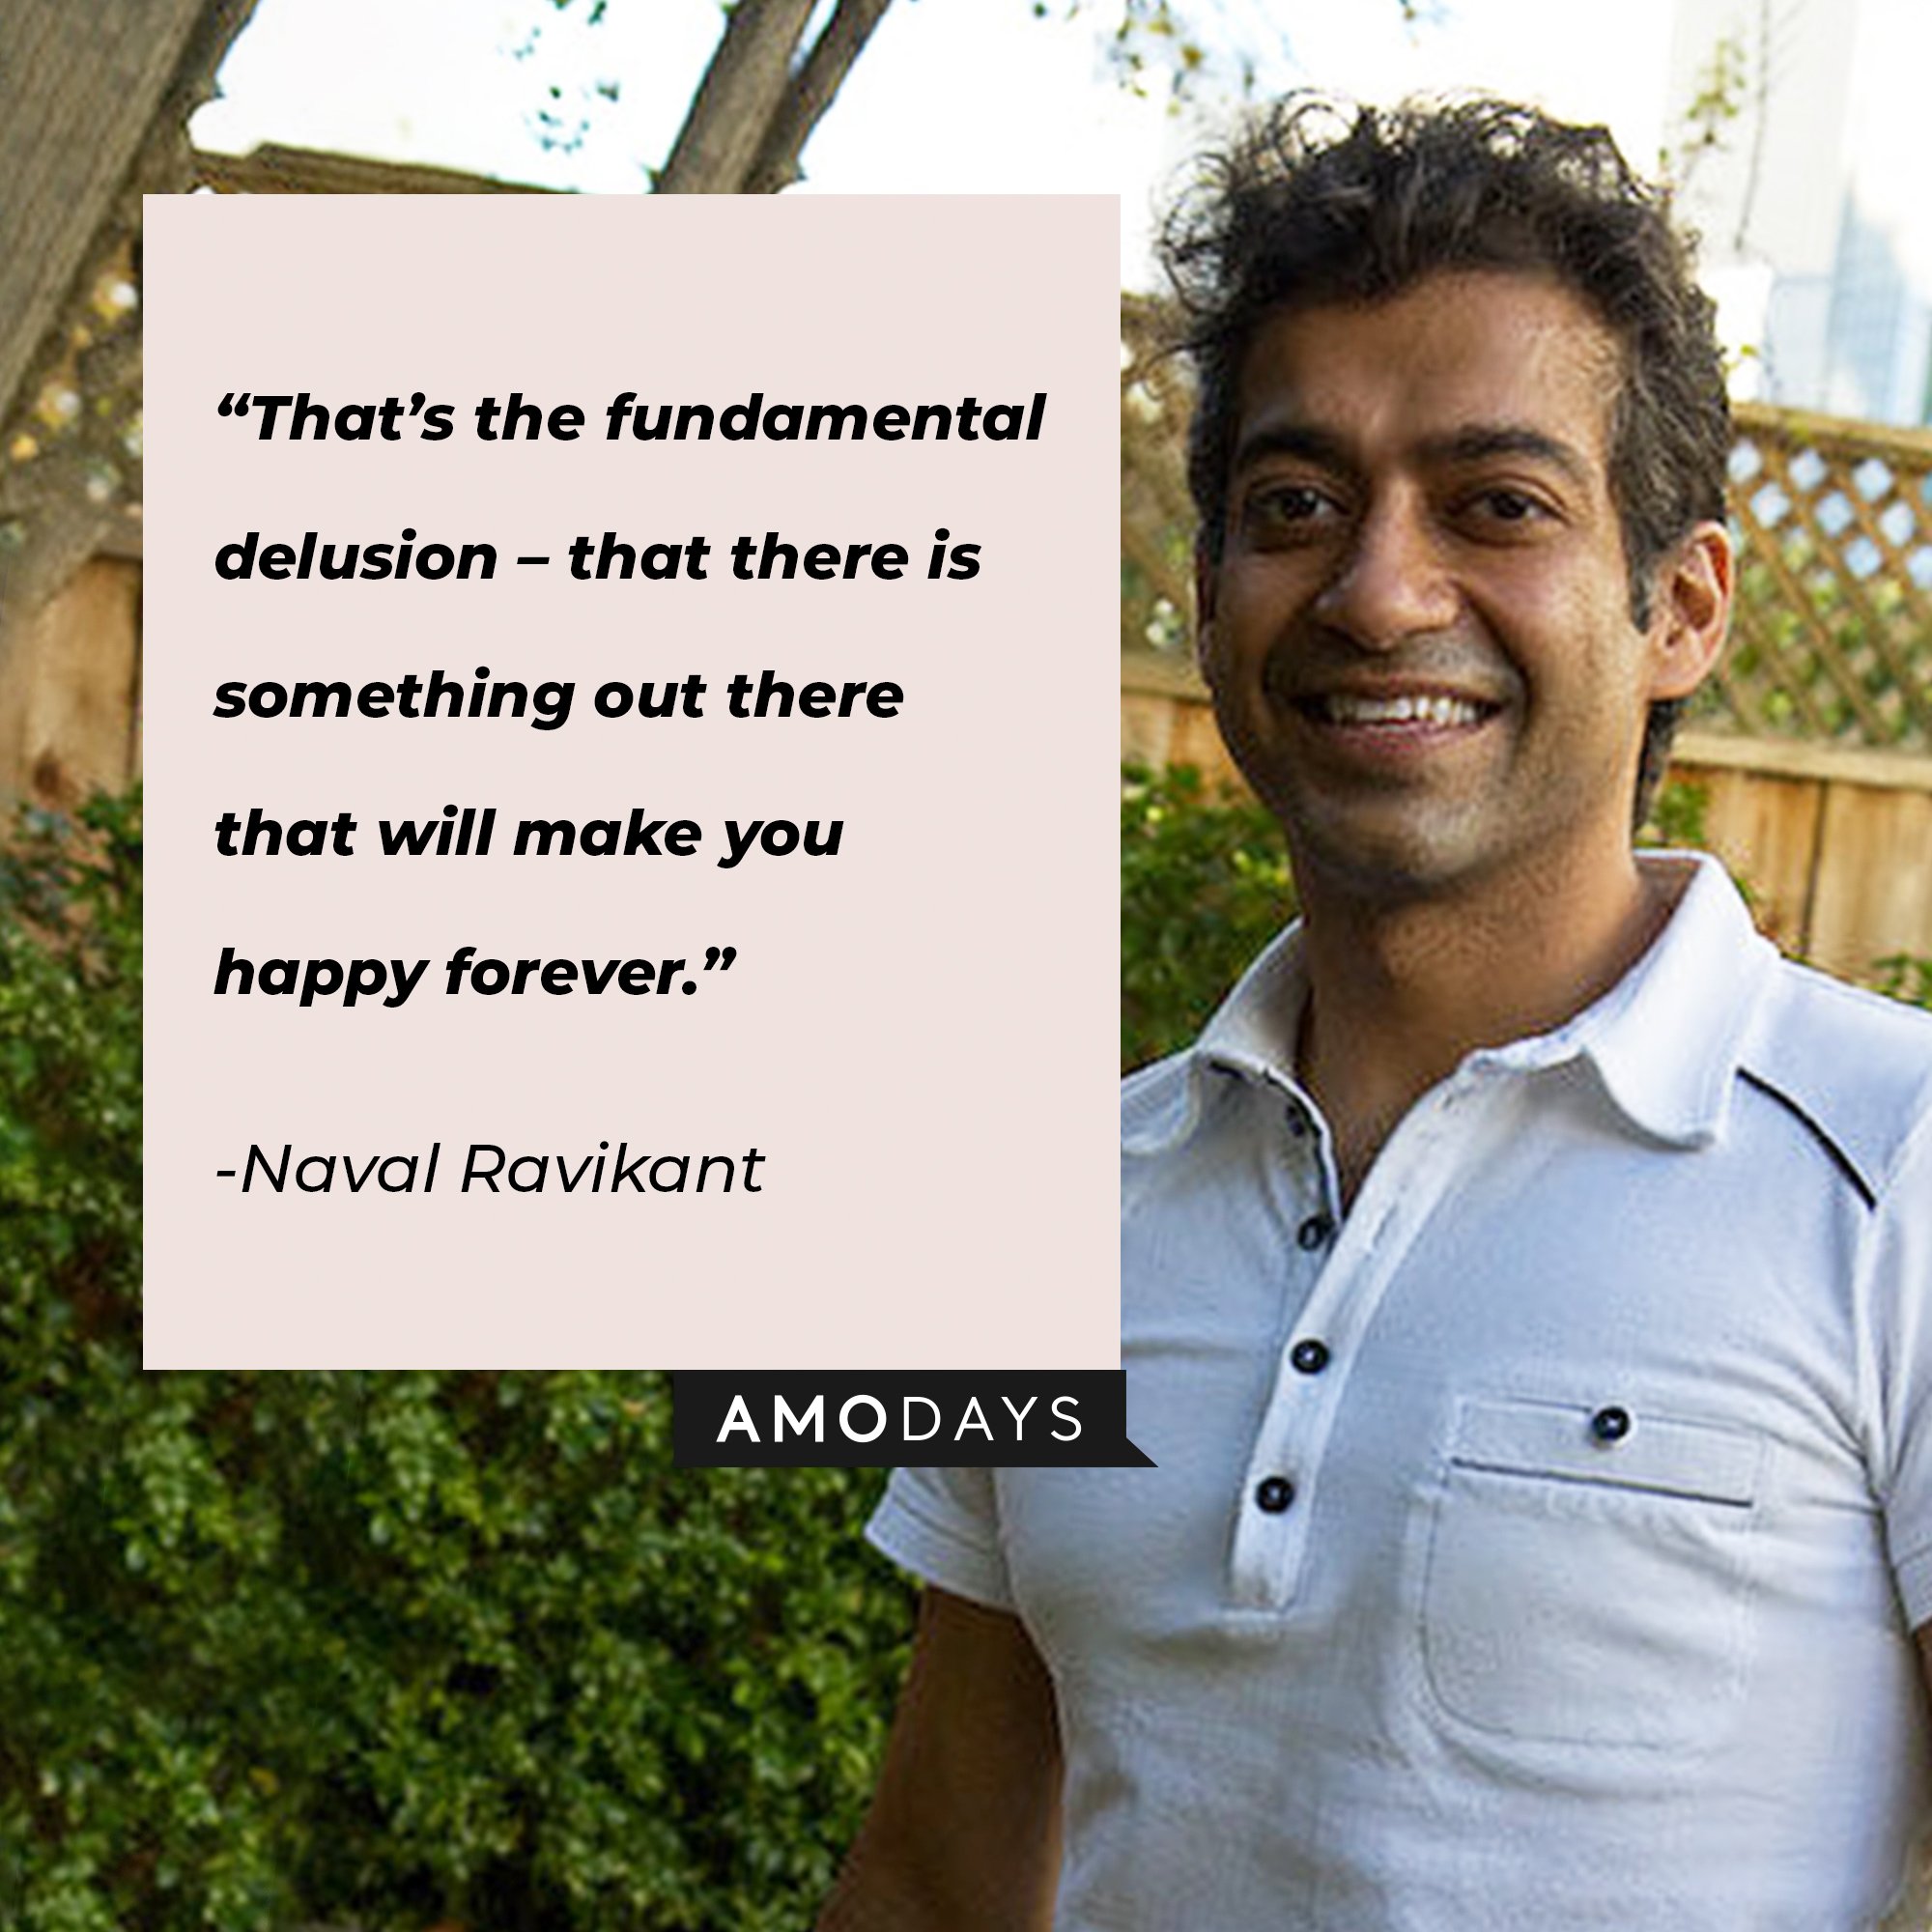 Naval Ravikant's quote: “That’s the fundamental delusion – that there is something out there that will make you happy forever.”  | Image: AmoDays